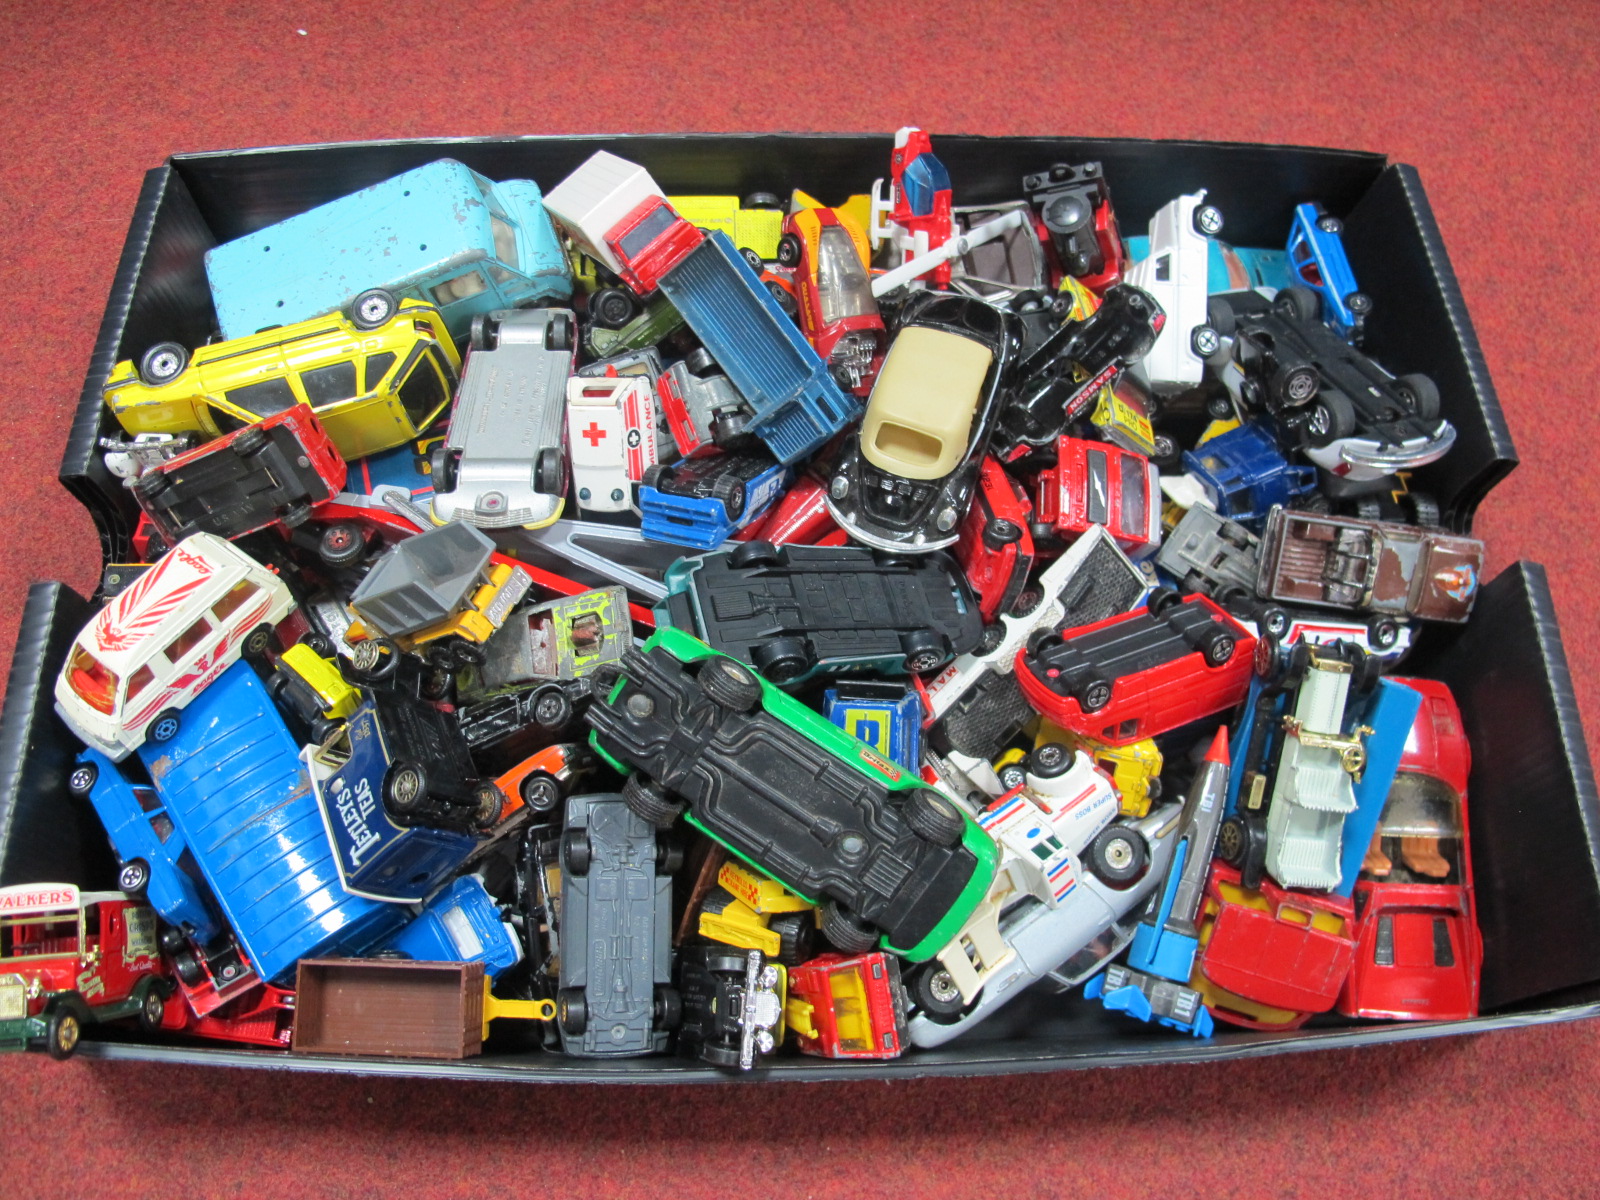 A Quantity of Diecast Vehicles, by Spot-On, Matchbox and others, all playworn.